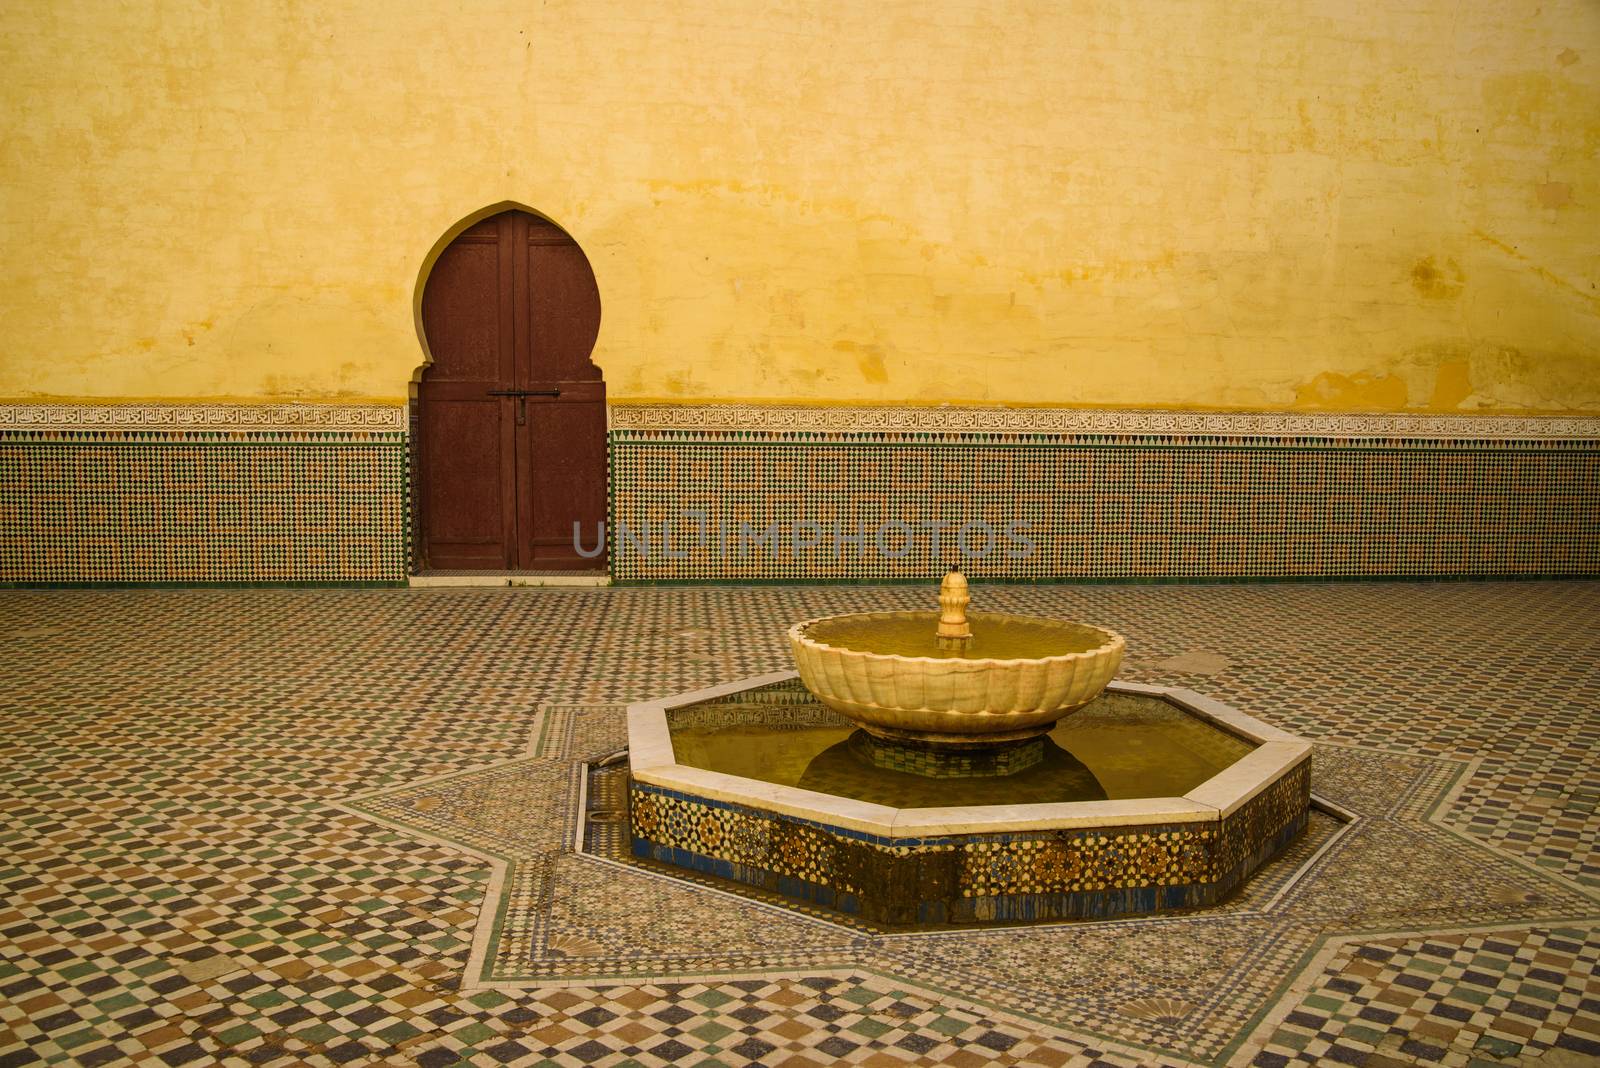 Mausoleum of Moulay Idris in Meknes, Morocco. by johnnychaos